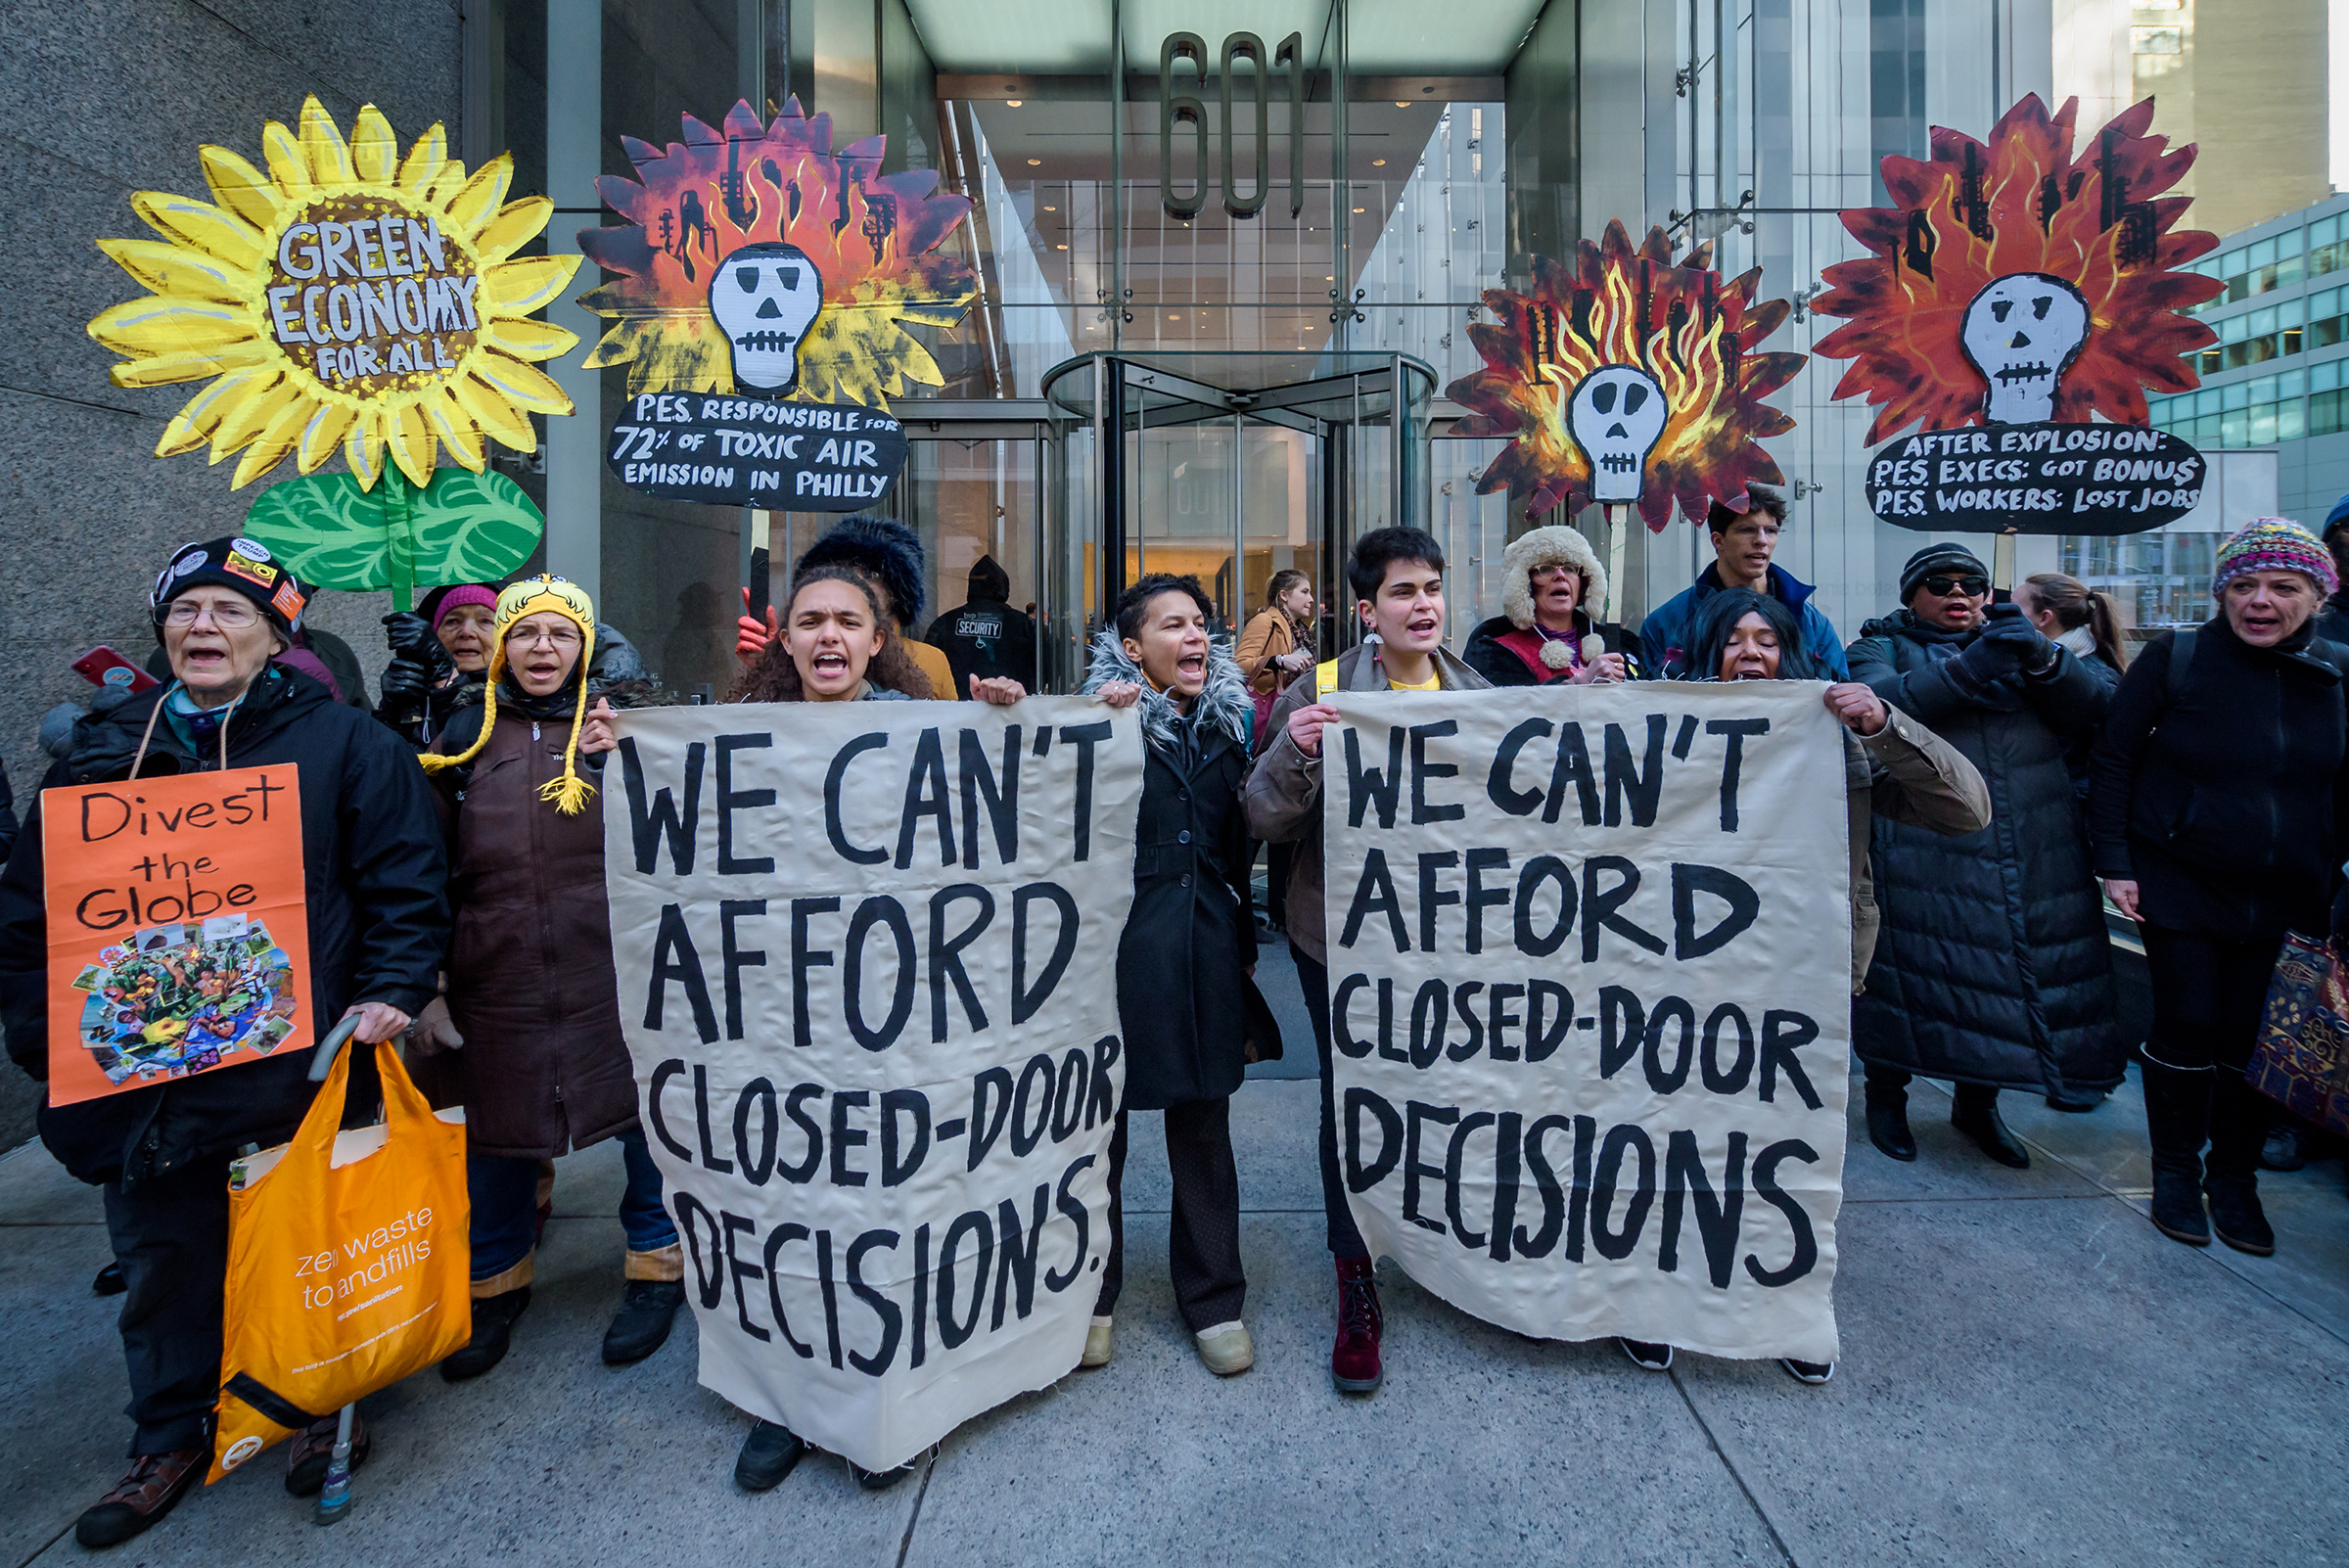 A Jan. 17 protest in opposition to the reopening of the Philadelphia Energy Solutions Refining Complex (Erik McGregor—Sipa USA)